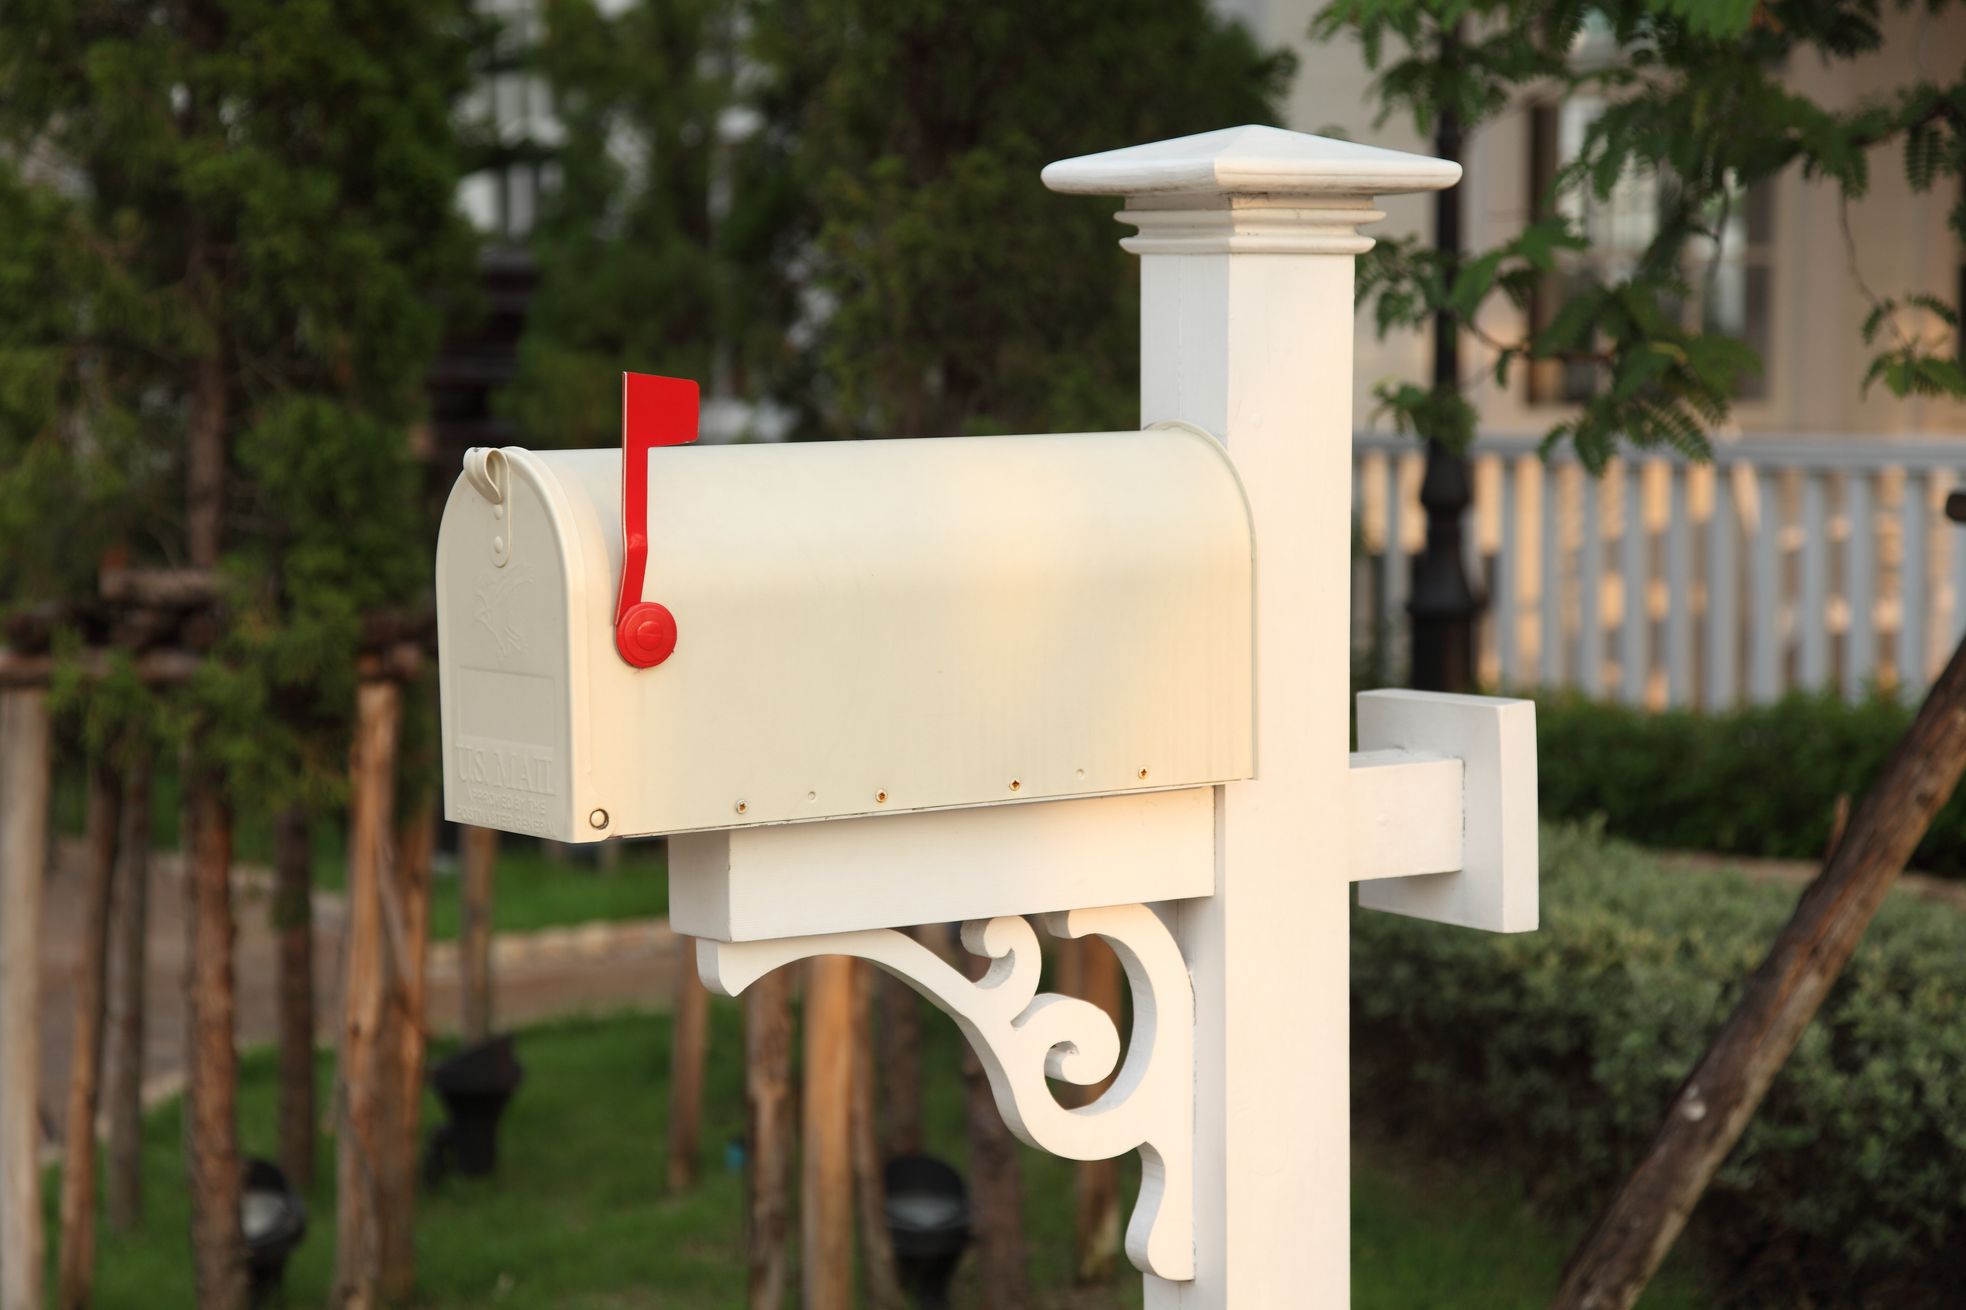 Mailbox in front of the house